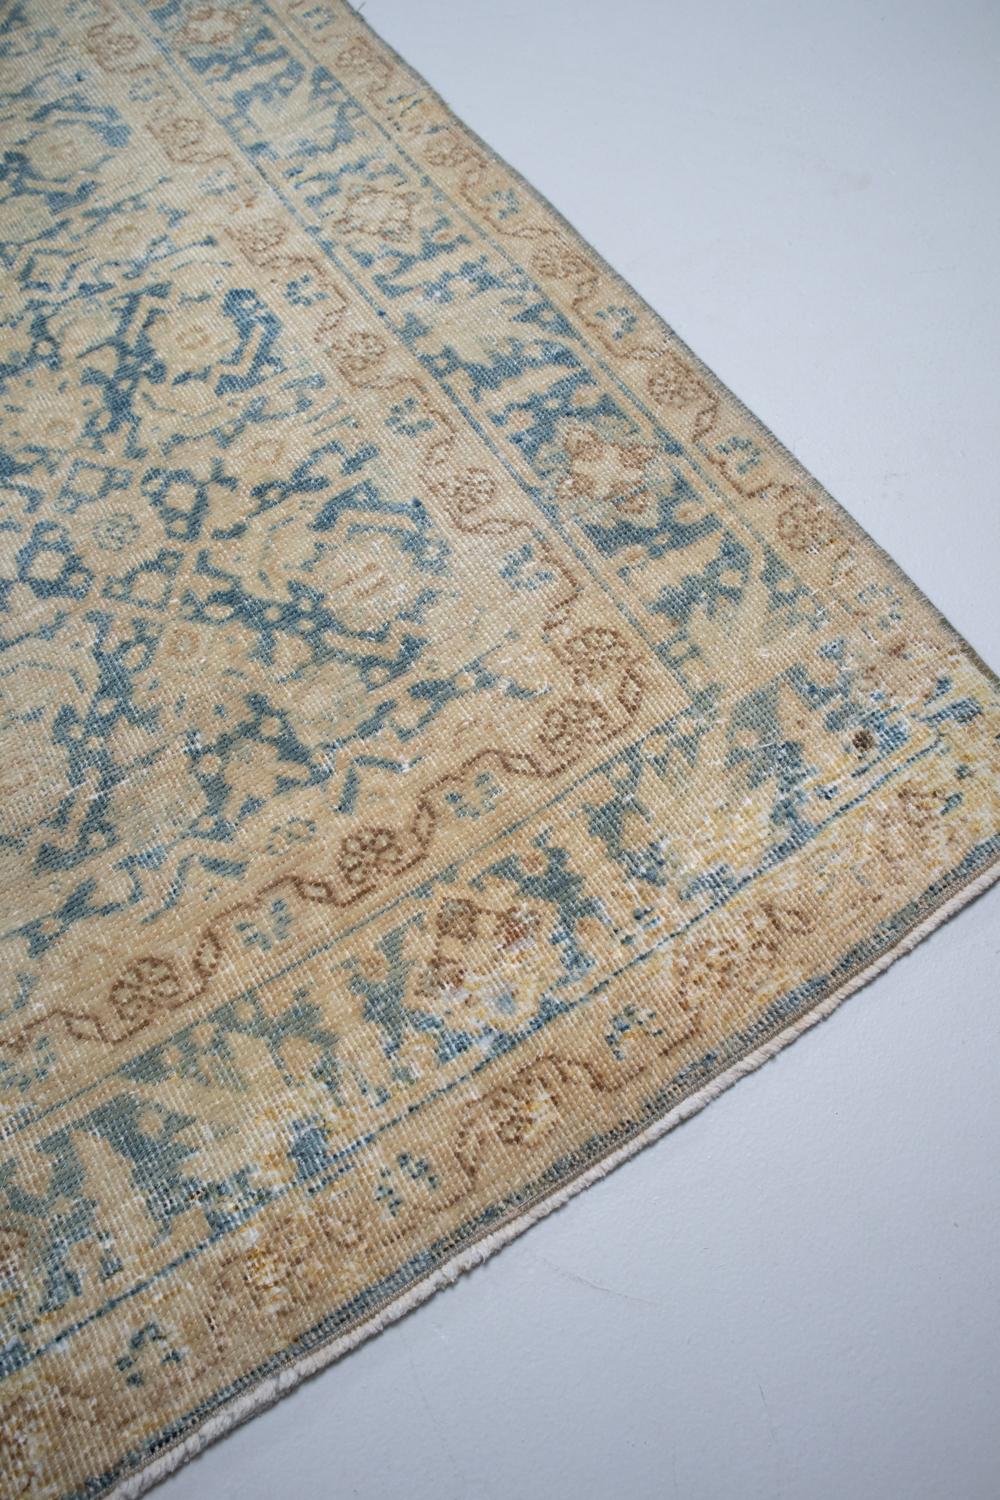 Vintage Persian Malayer Runner Rug For Sale 3